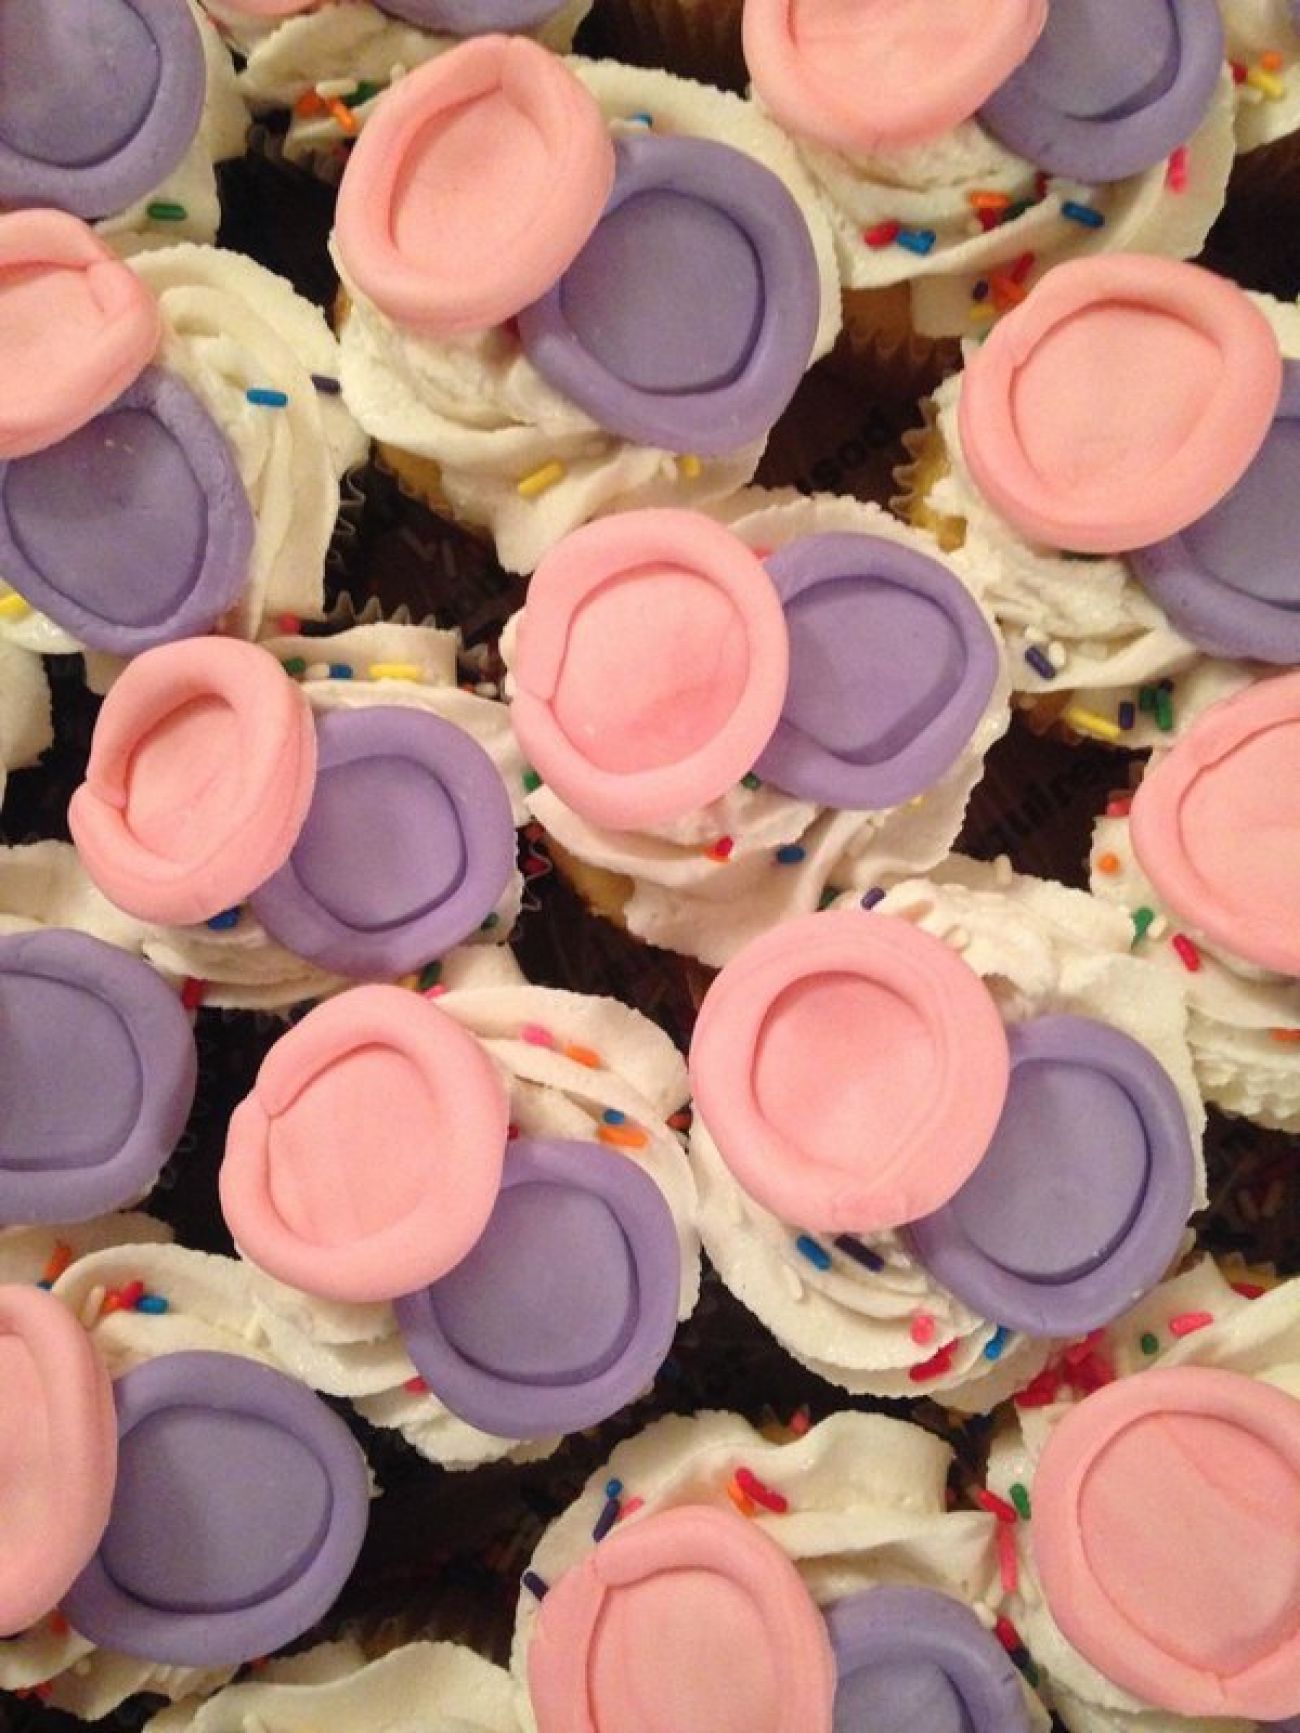 cupcakes with condoms on them